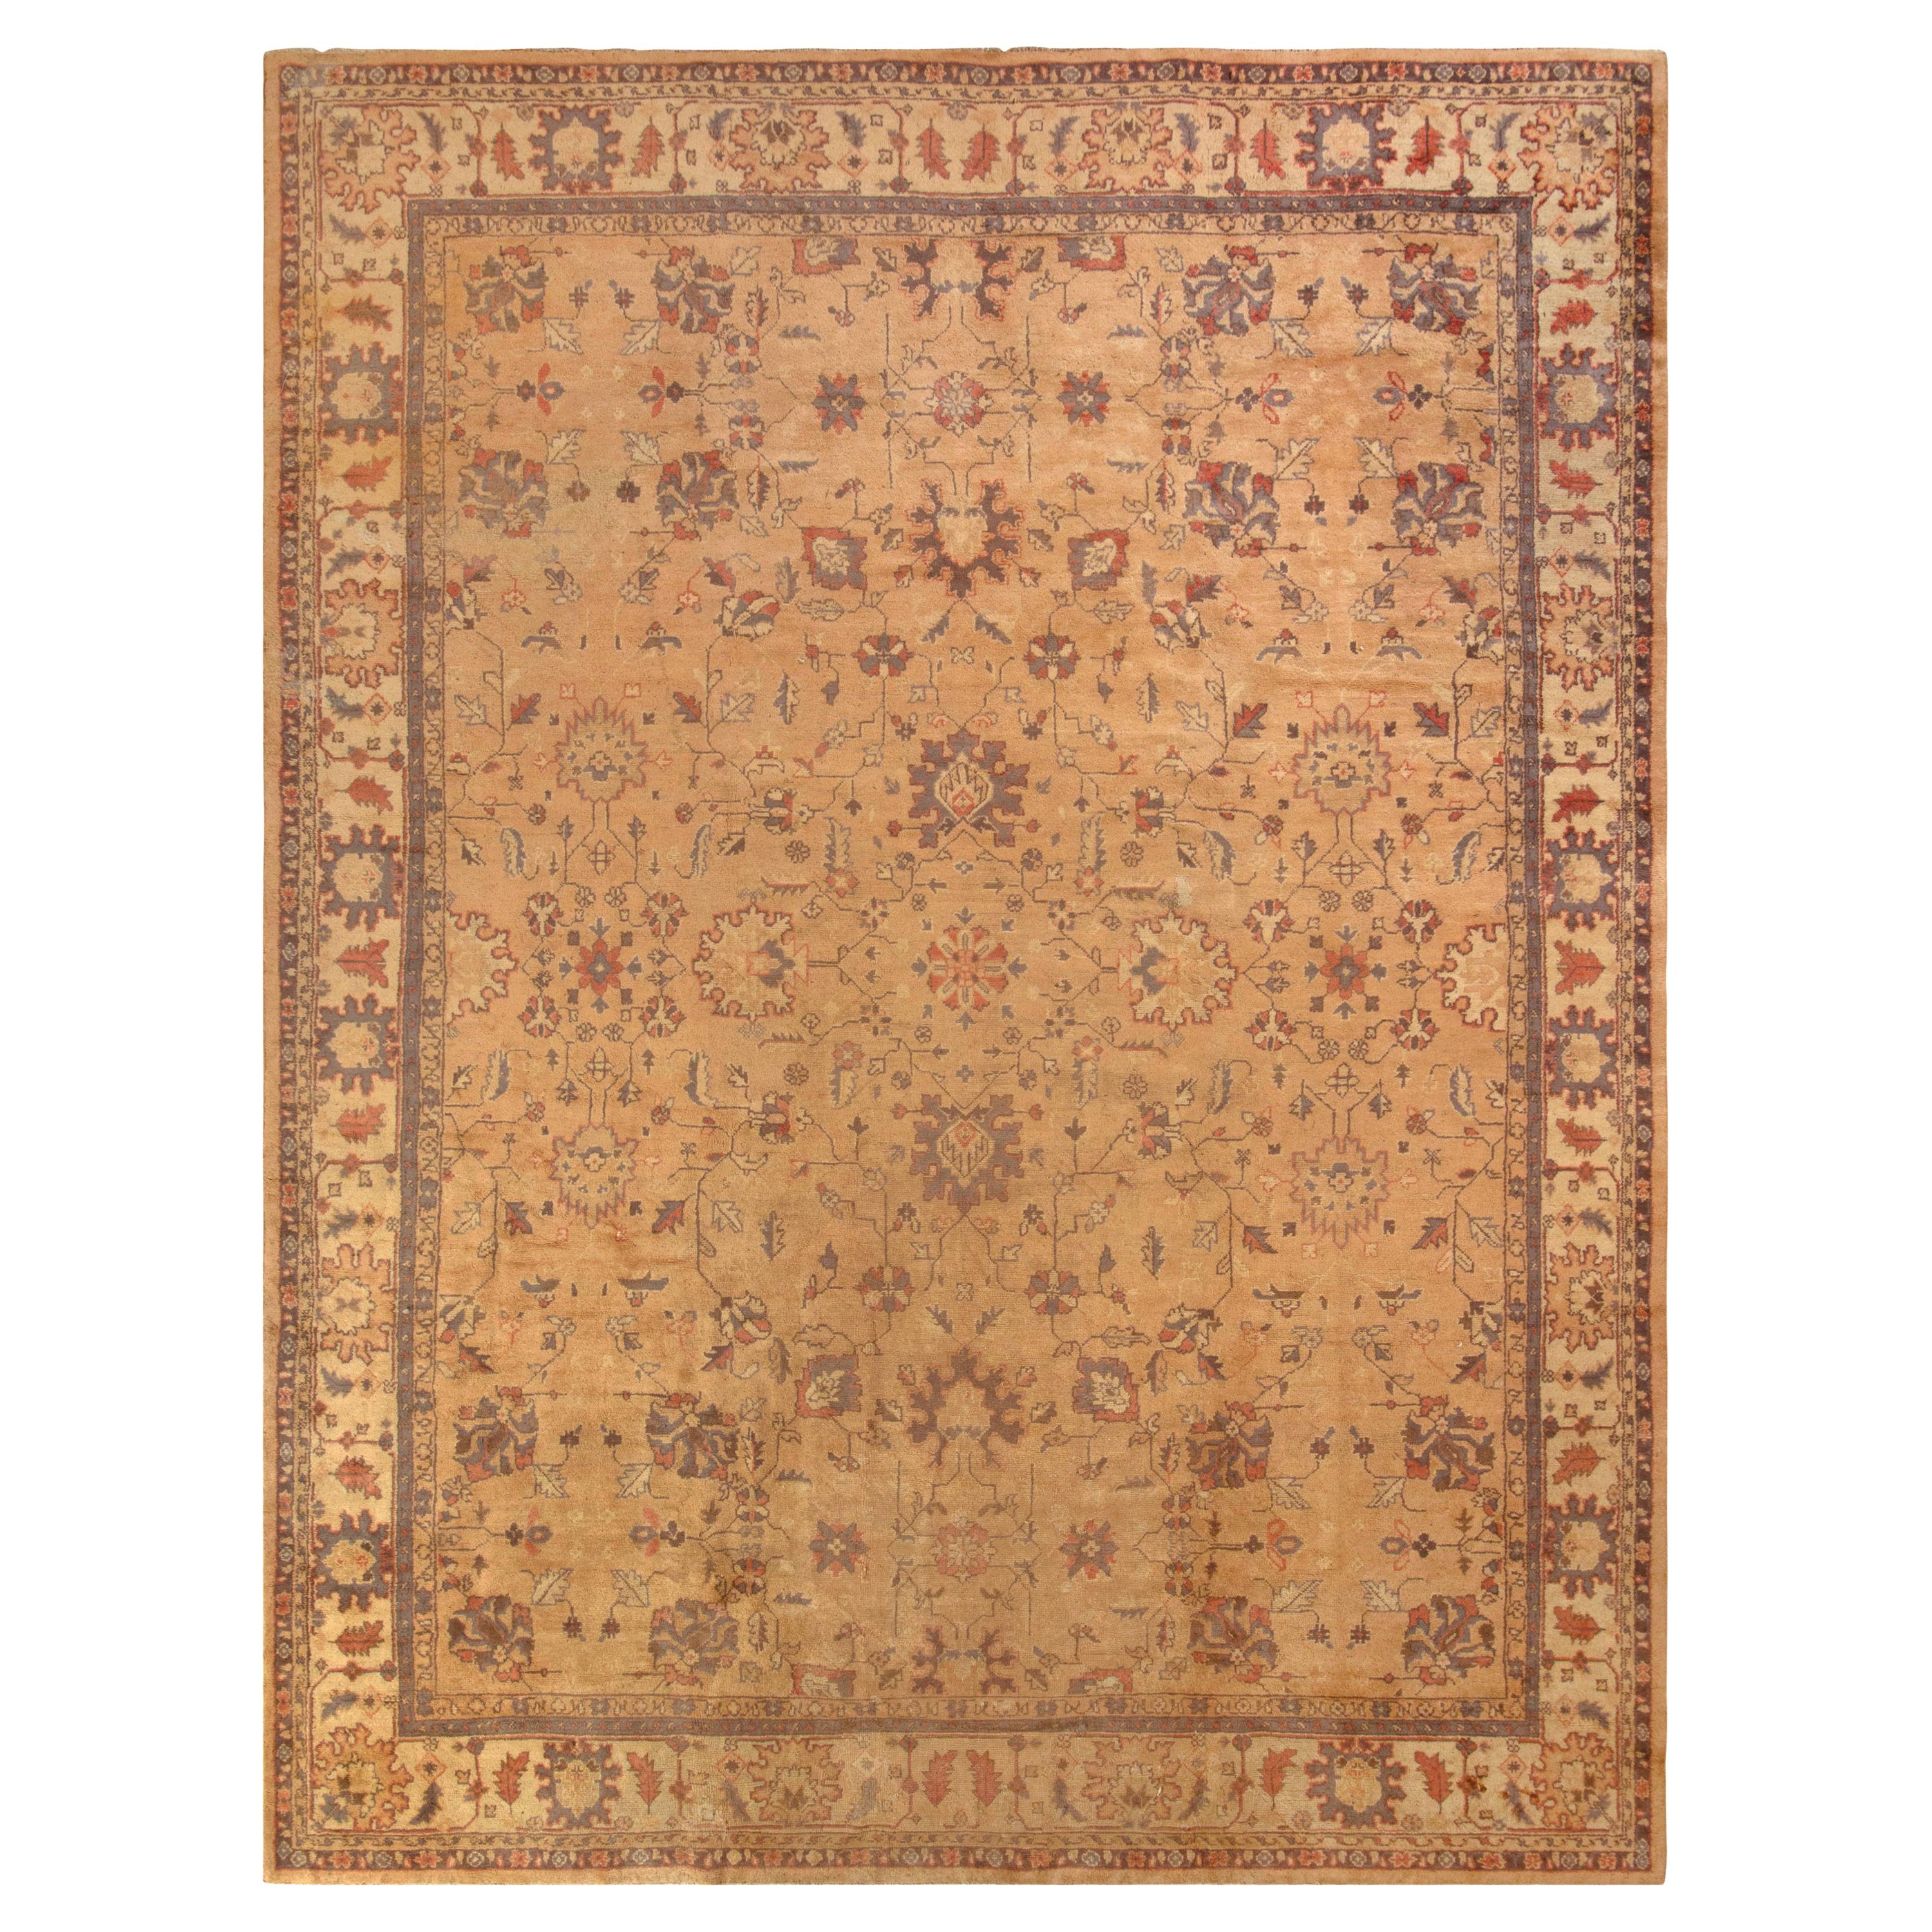 Antique Agra Rug in Beige-Brown and Red Floral Pattern by Rug & Kilim For Sale